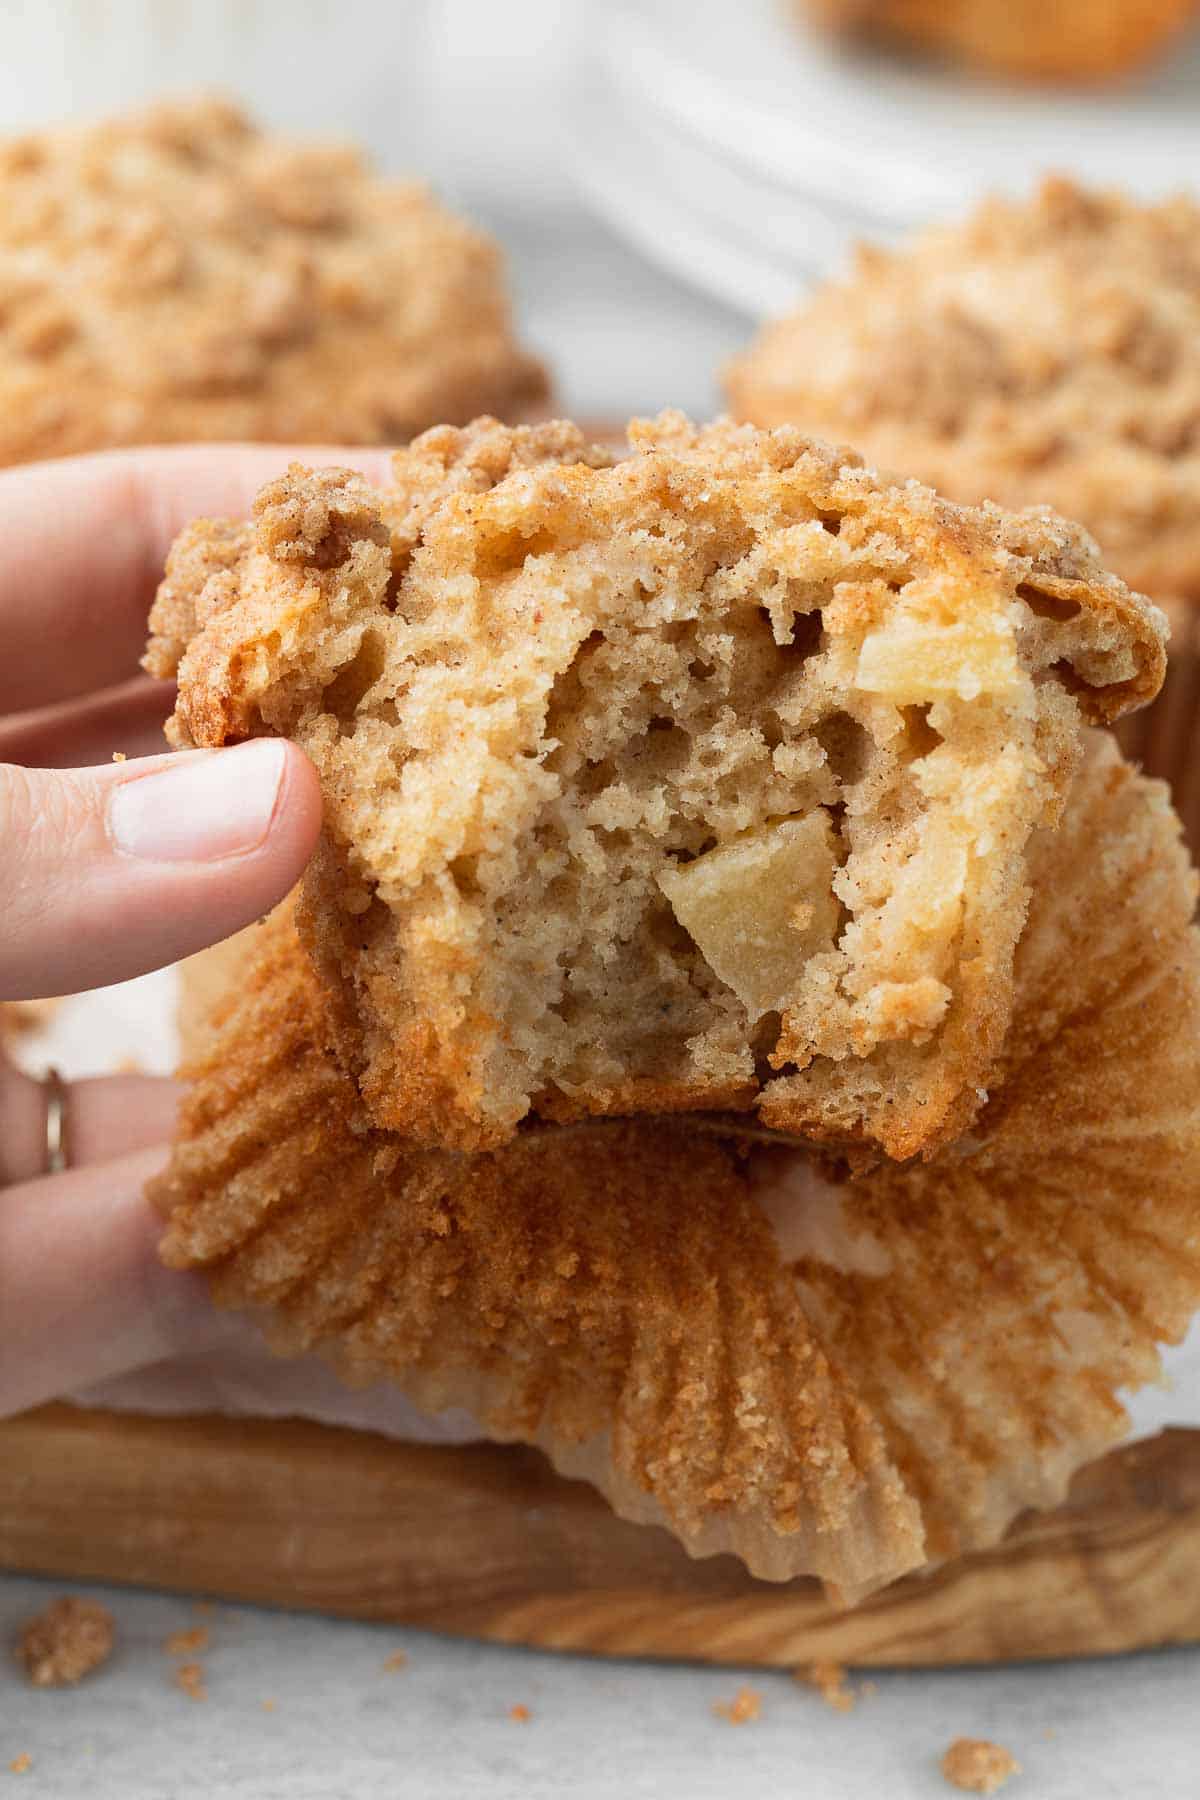 Apple muffin with a bite taken out of it